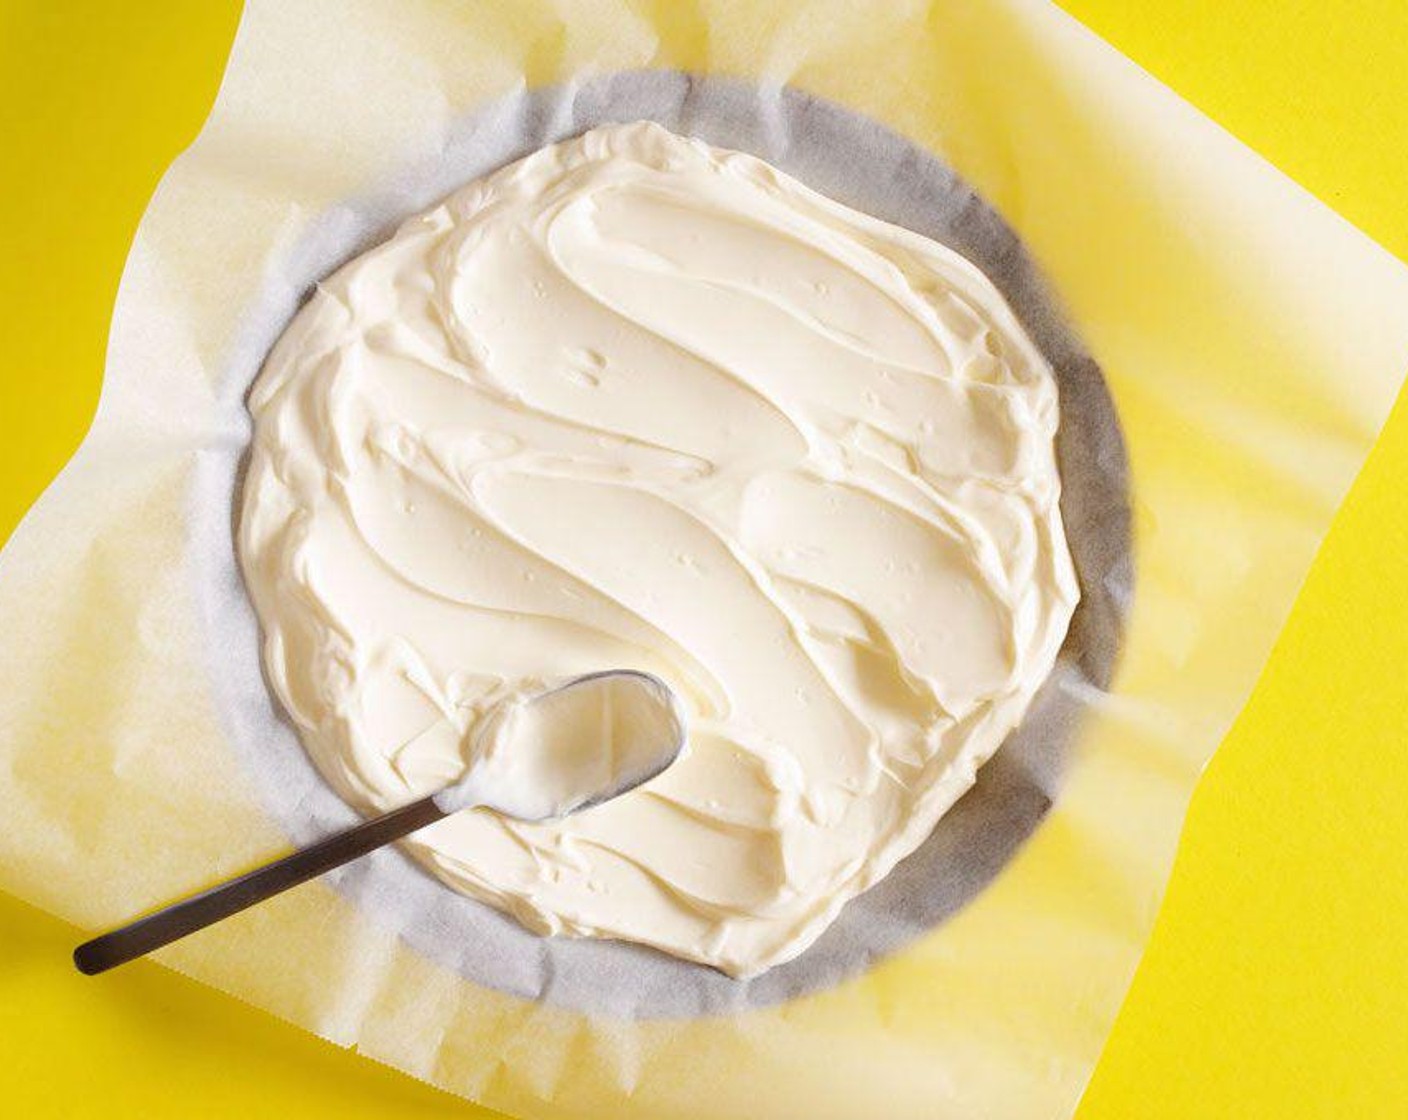 step 1 If desired, mix together Greek Yogurt (2 1/2 cups) and Maple Syrup (1 Tbsp). Spread yogurt onto a parchment paper-lined baking sheet so that it's about 1/4 to 1/2-inch thick.